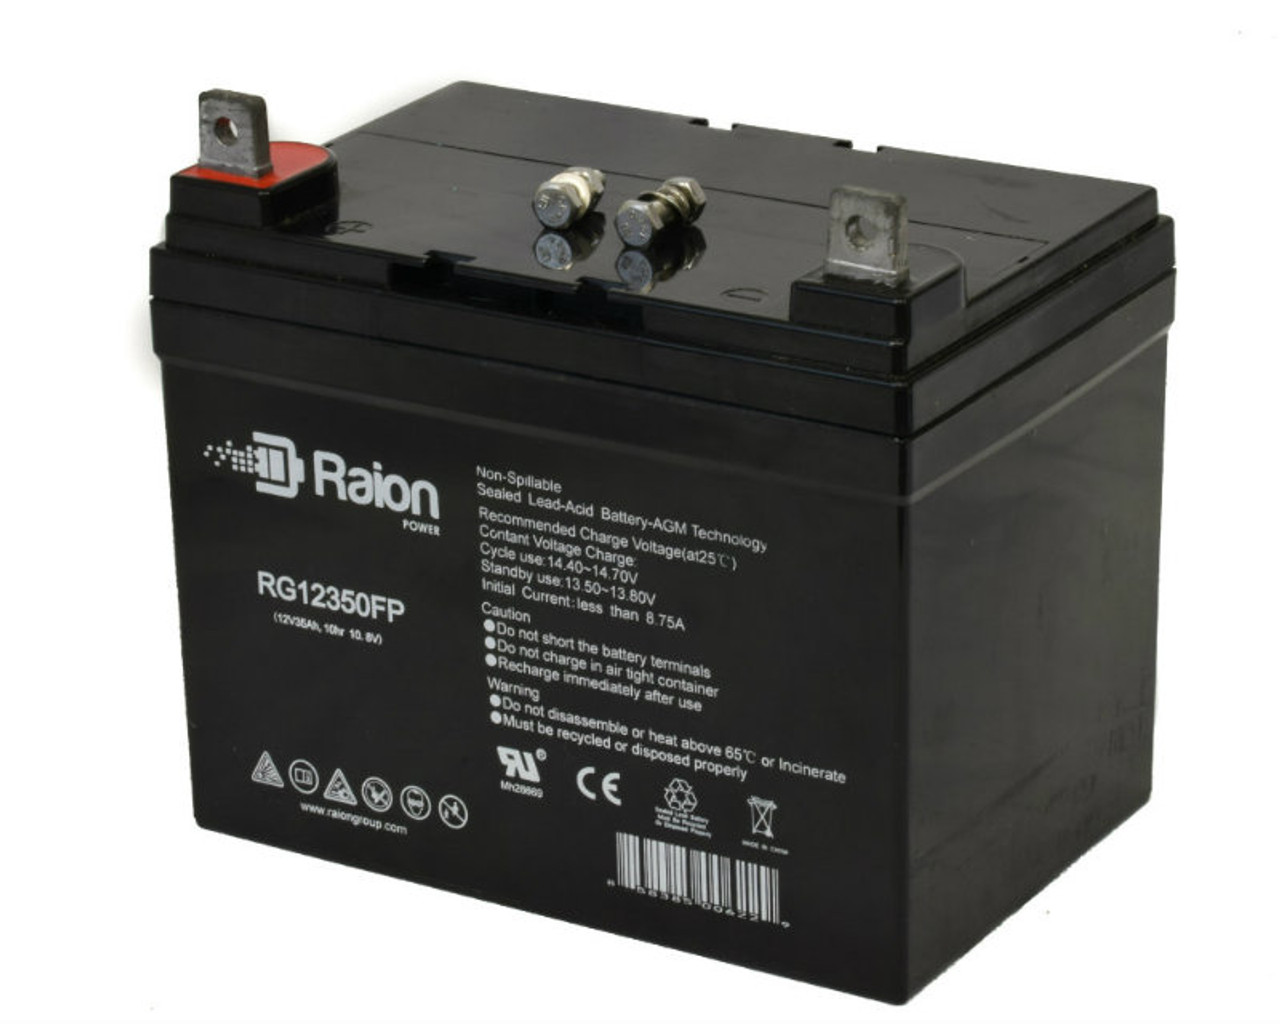 Raion Power Replacement 12V 35Ah RG12350FP Battery for Sabre (By John Deere) 1646HS